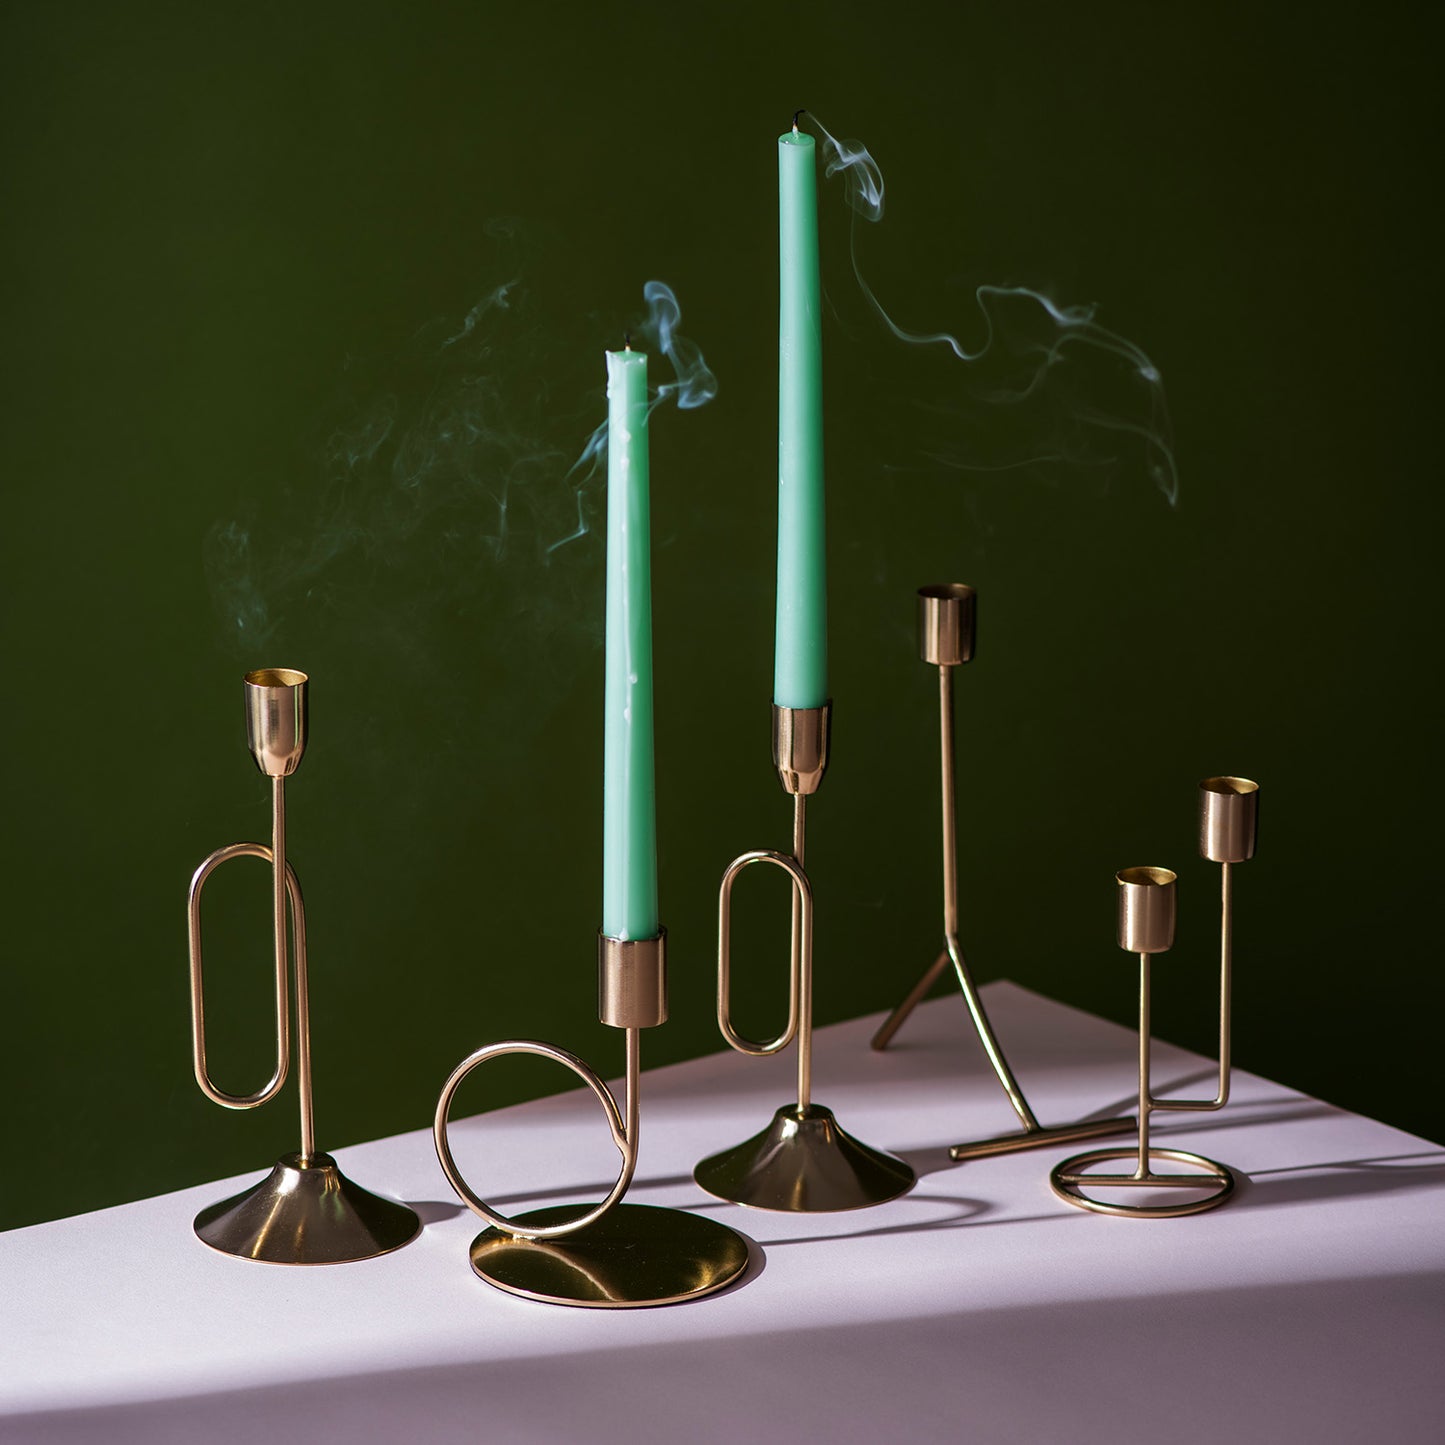 Glamorous Gold: Exquisite Candle Holder